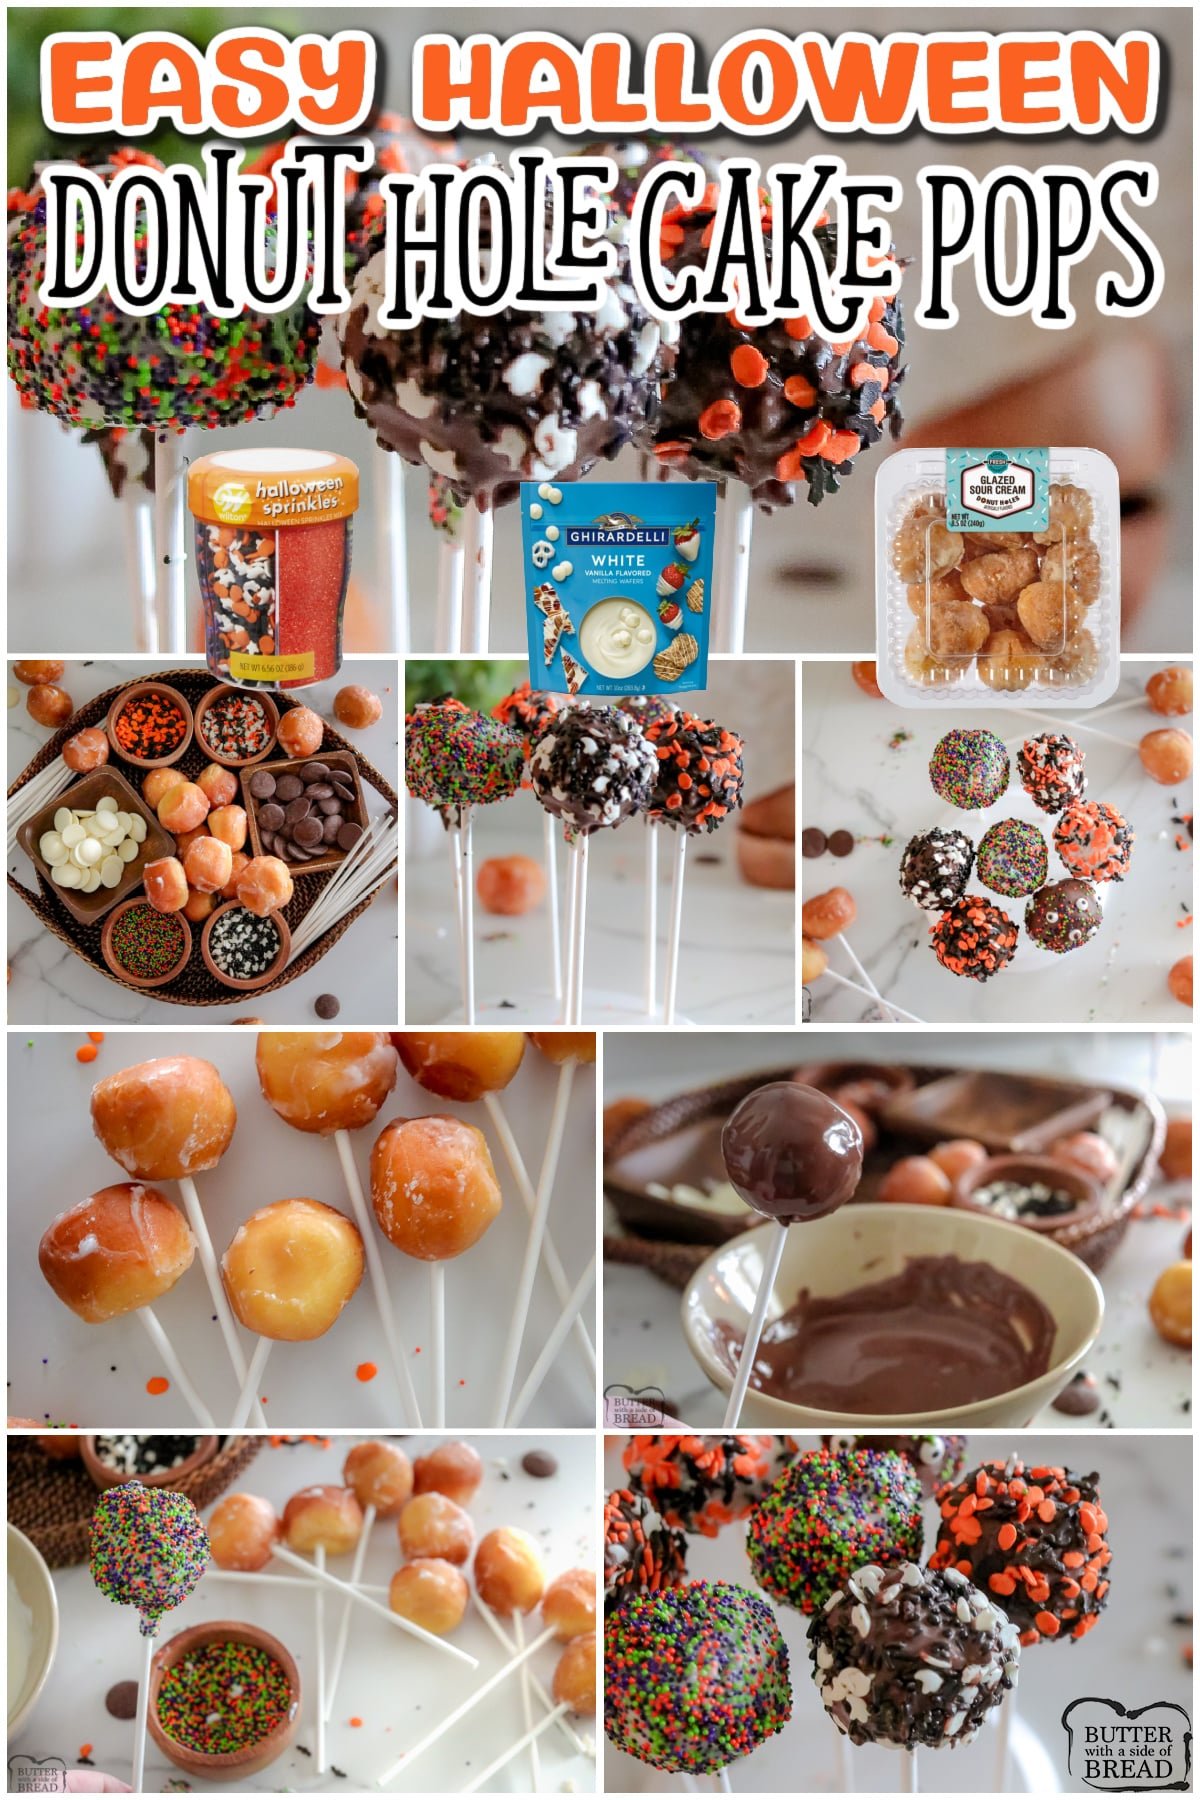 Halloween Donut Hole Cake Pops are so festive and made in just minutes! These no-bake Halloween treats are simple to make and taste absolutely incredible too!